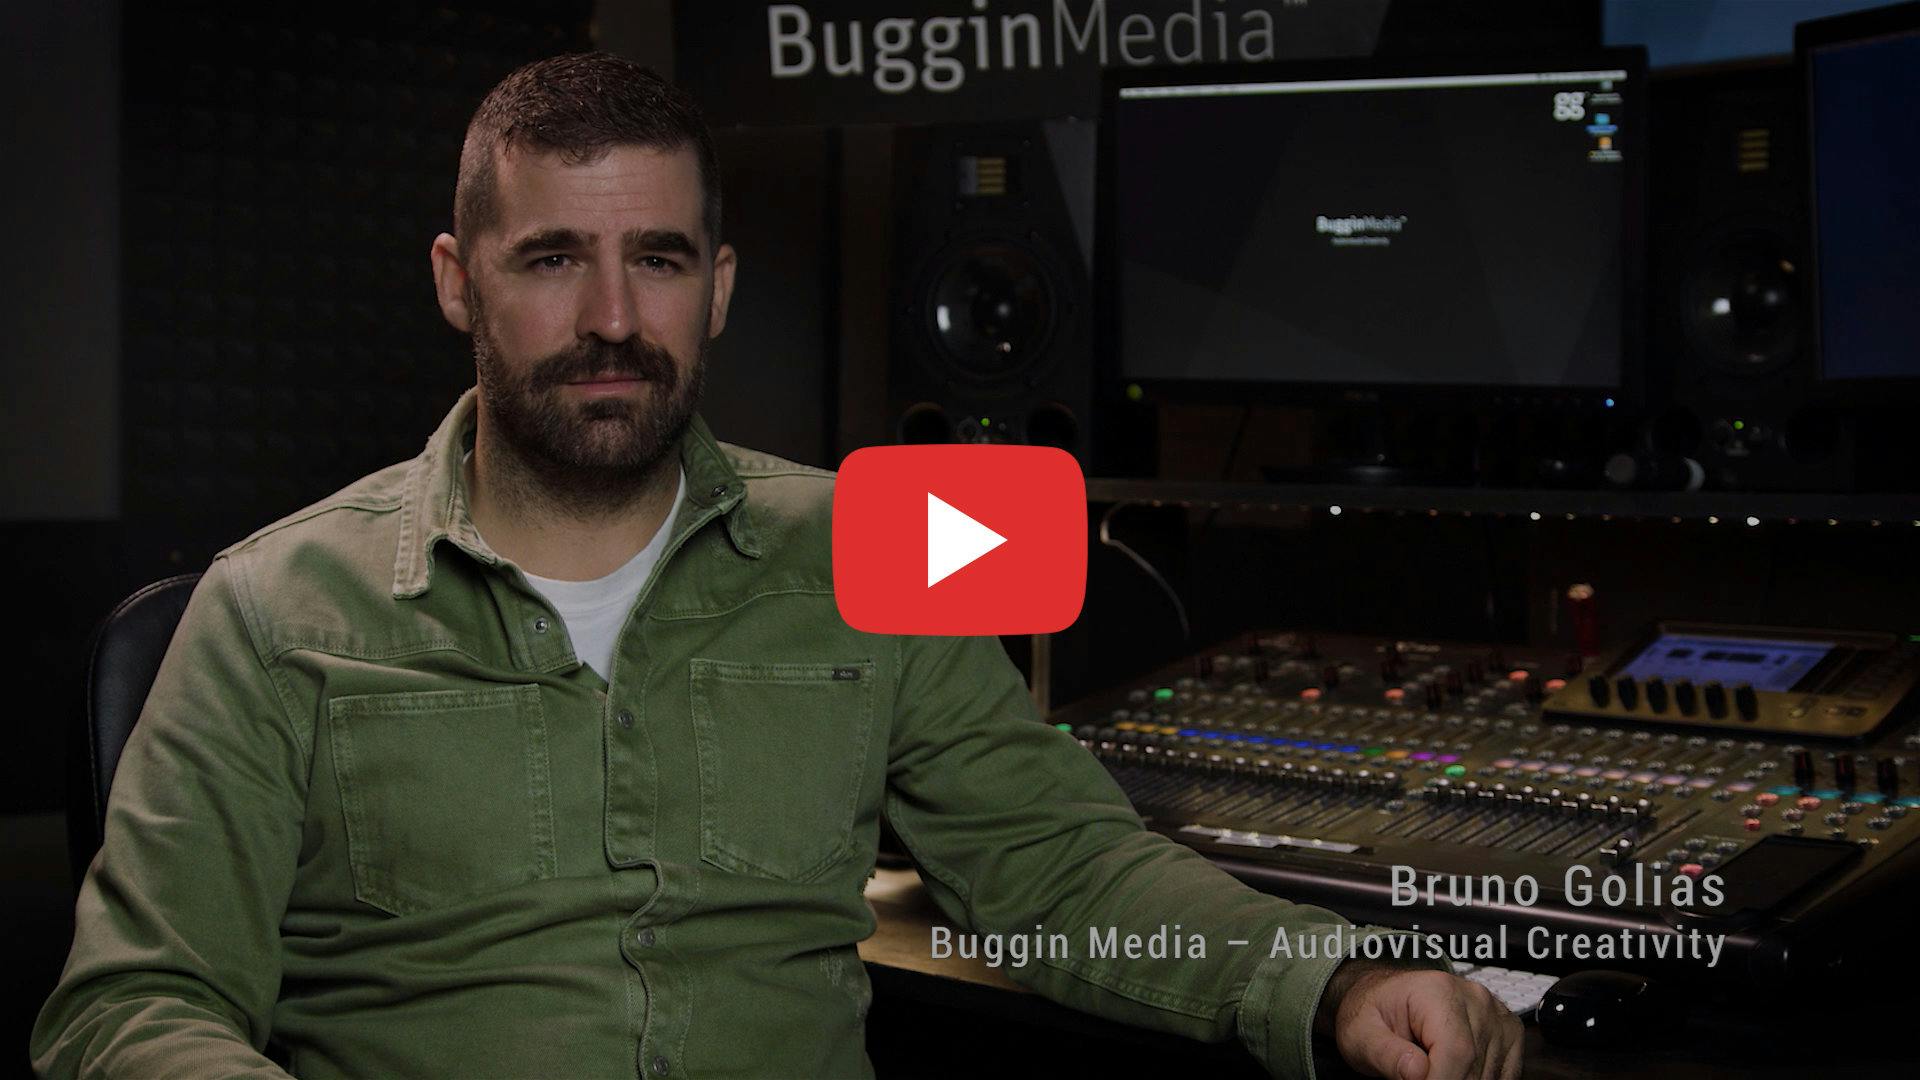 Buggin Media on directing voice talent remotely